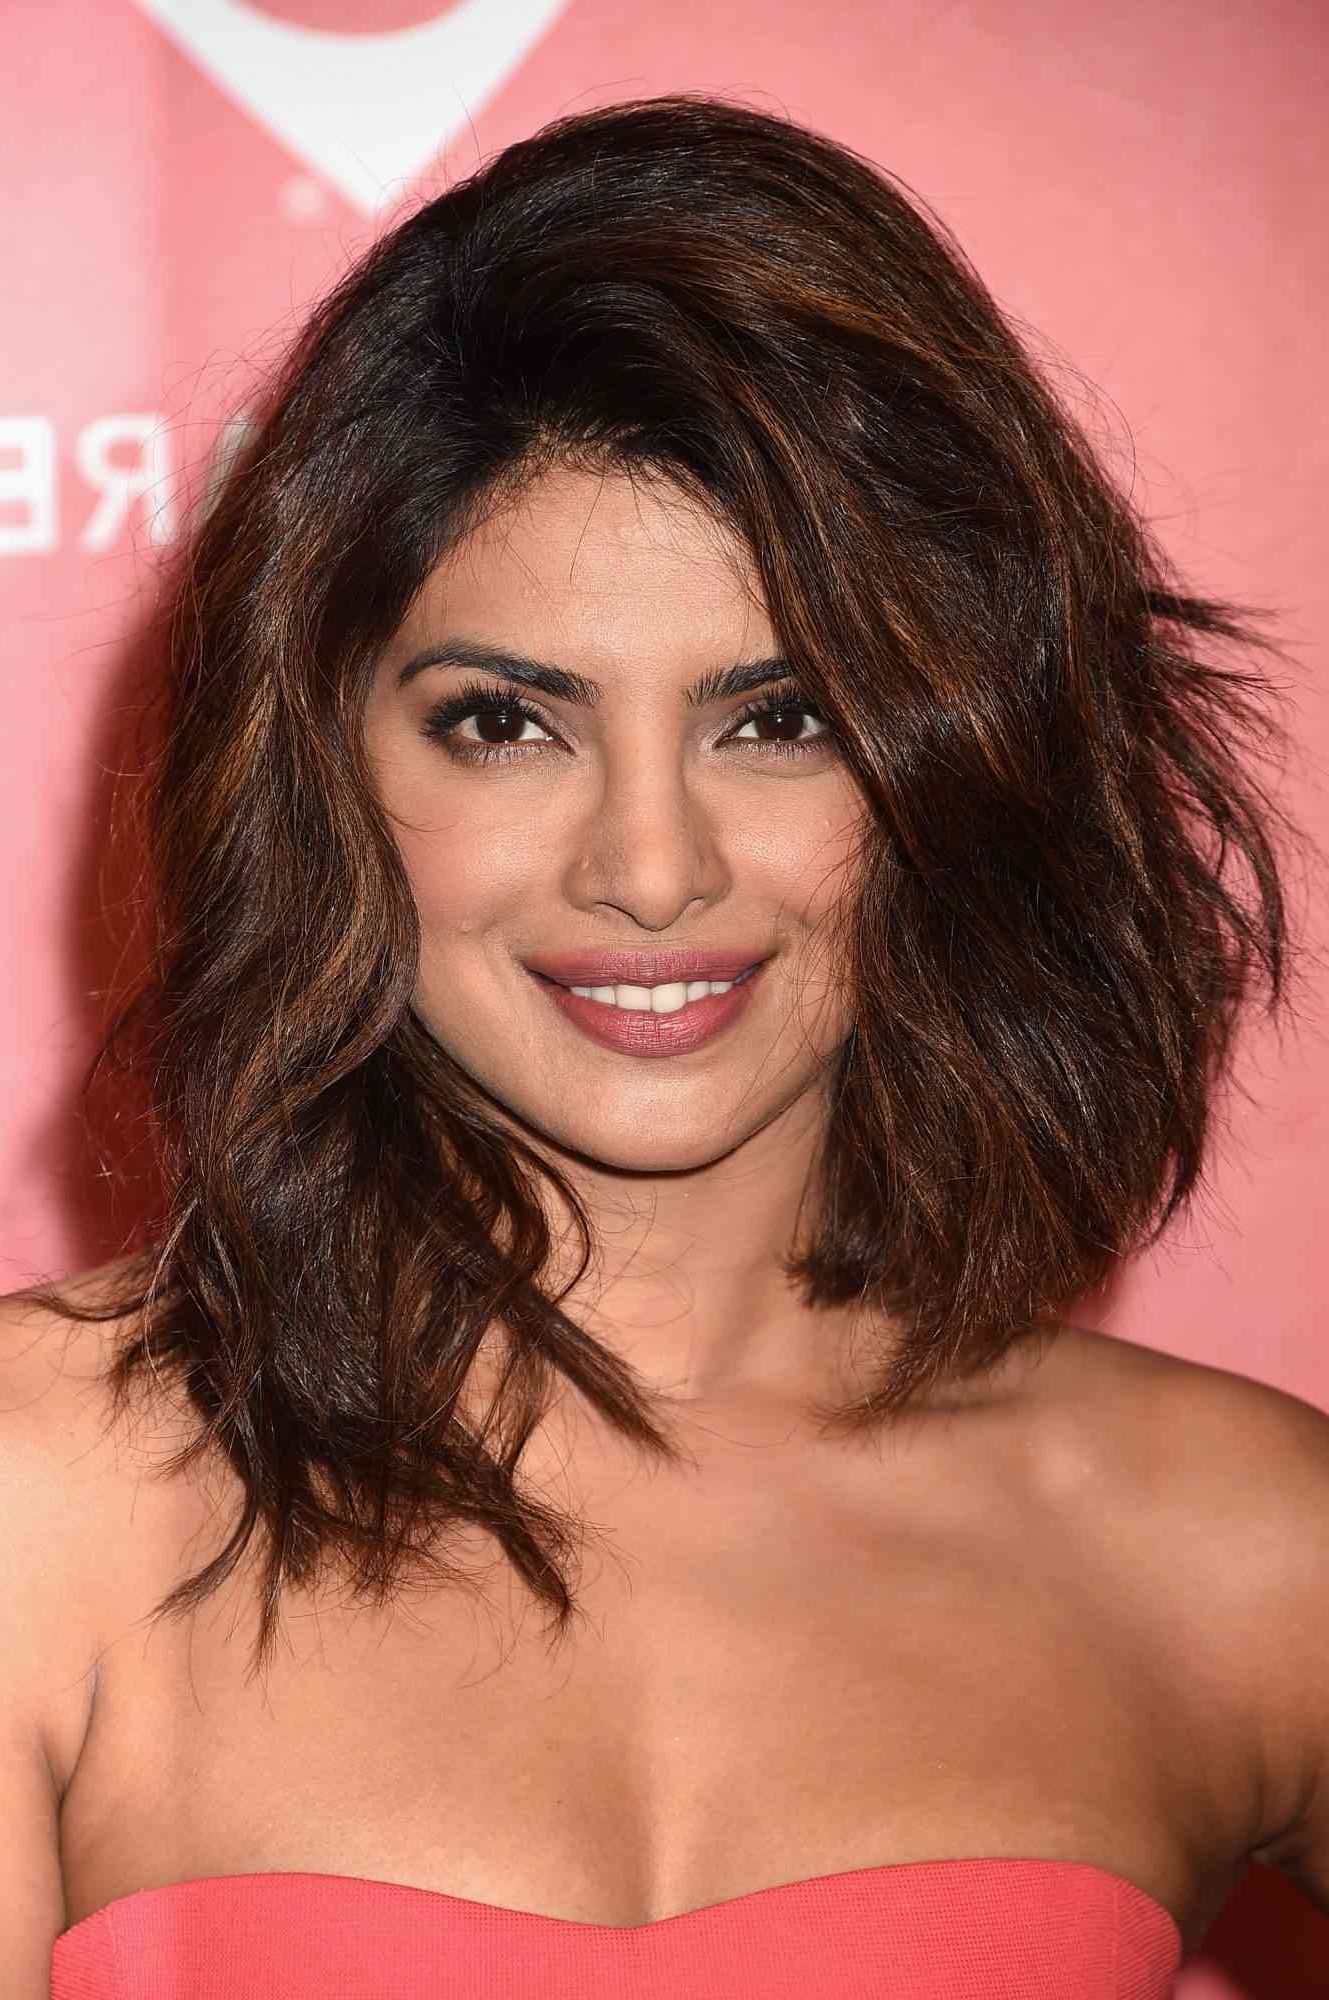 Asymmetrical Haircut Ideas – Best Asymmetrical Lob Haircuts Pertaining To 2018 Asymmetrical Lob Haircuts With Waves (View 12 of 25)